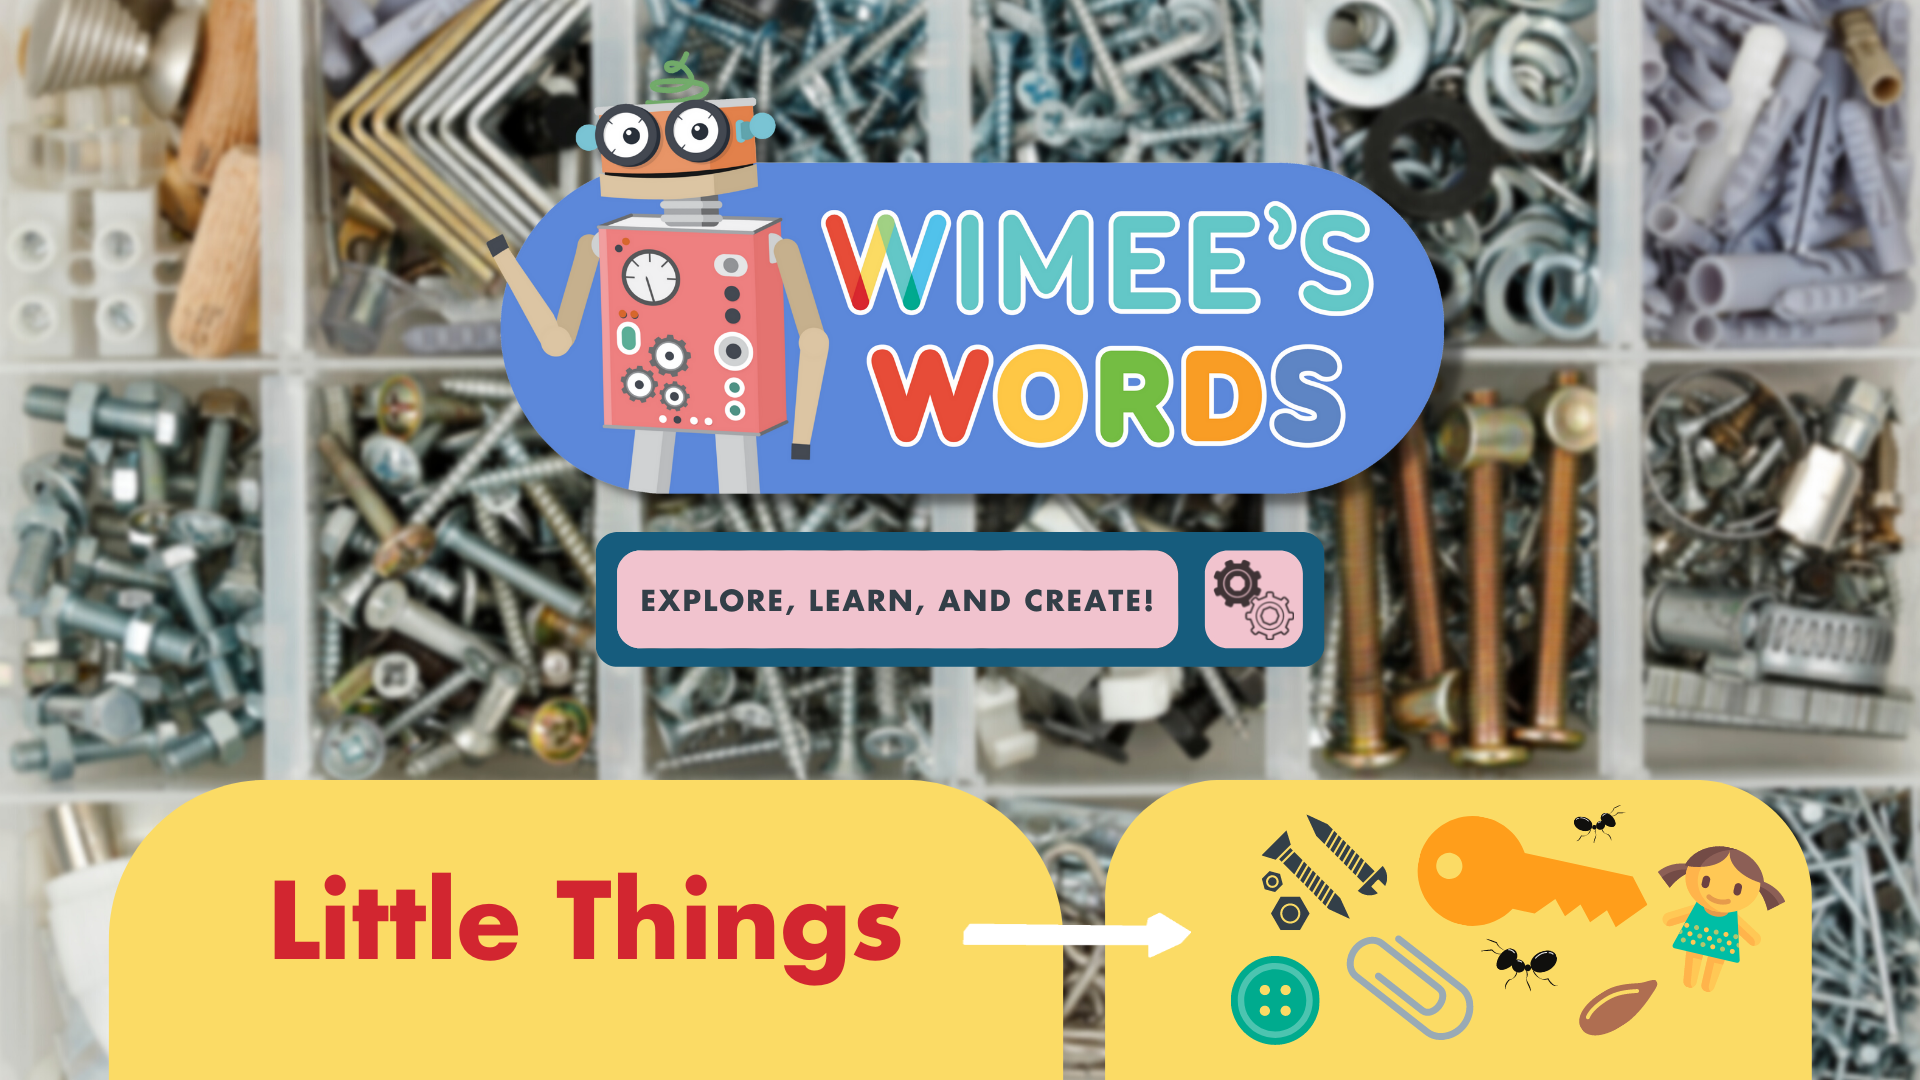 An organizer for nails, washers, and other small equipment. The Wimee's Words logo and the title "Little Things" is on the image.